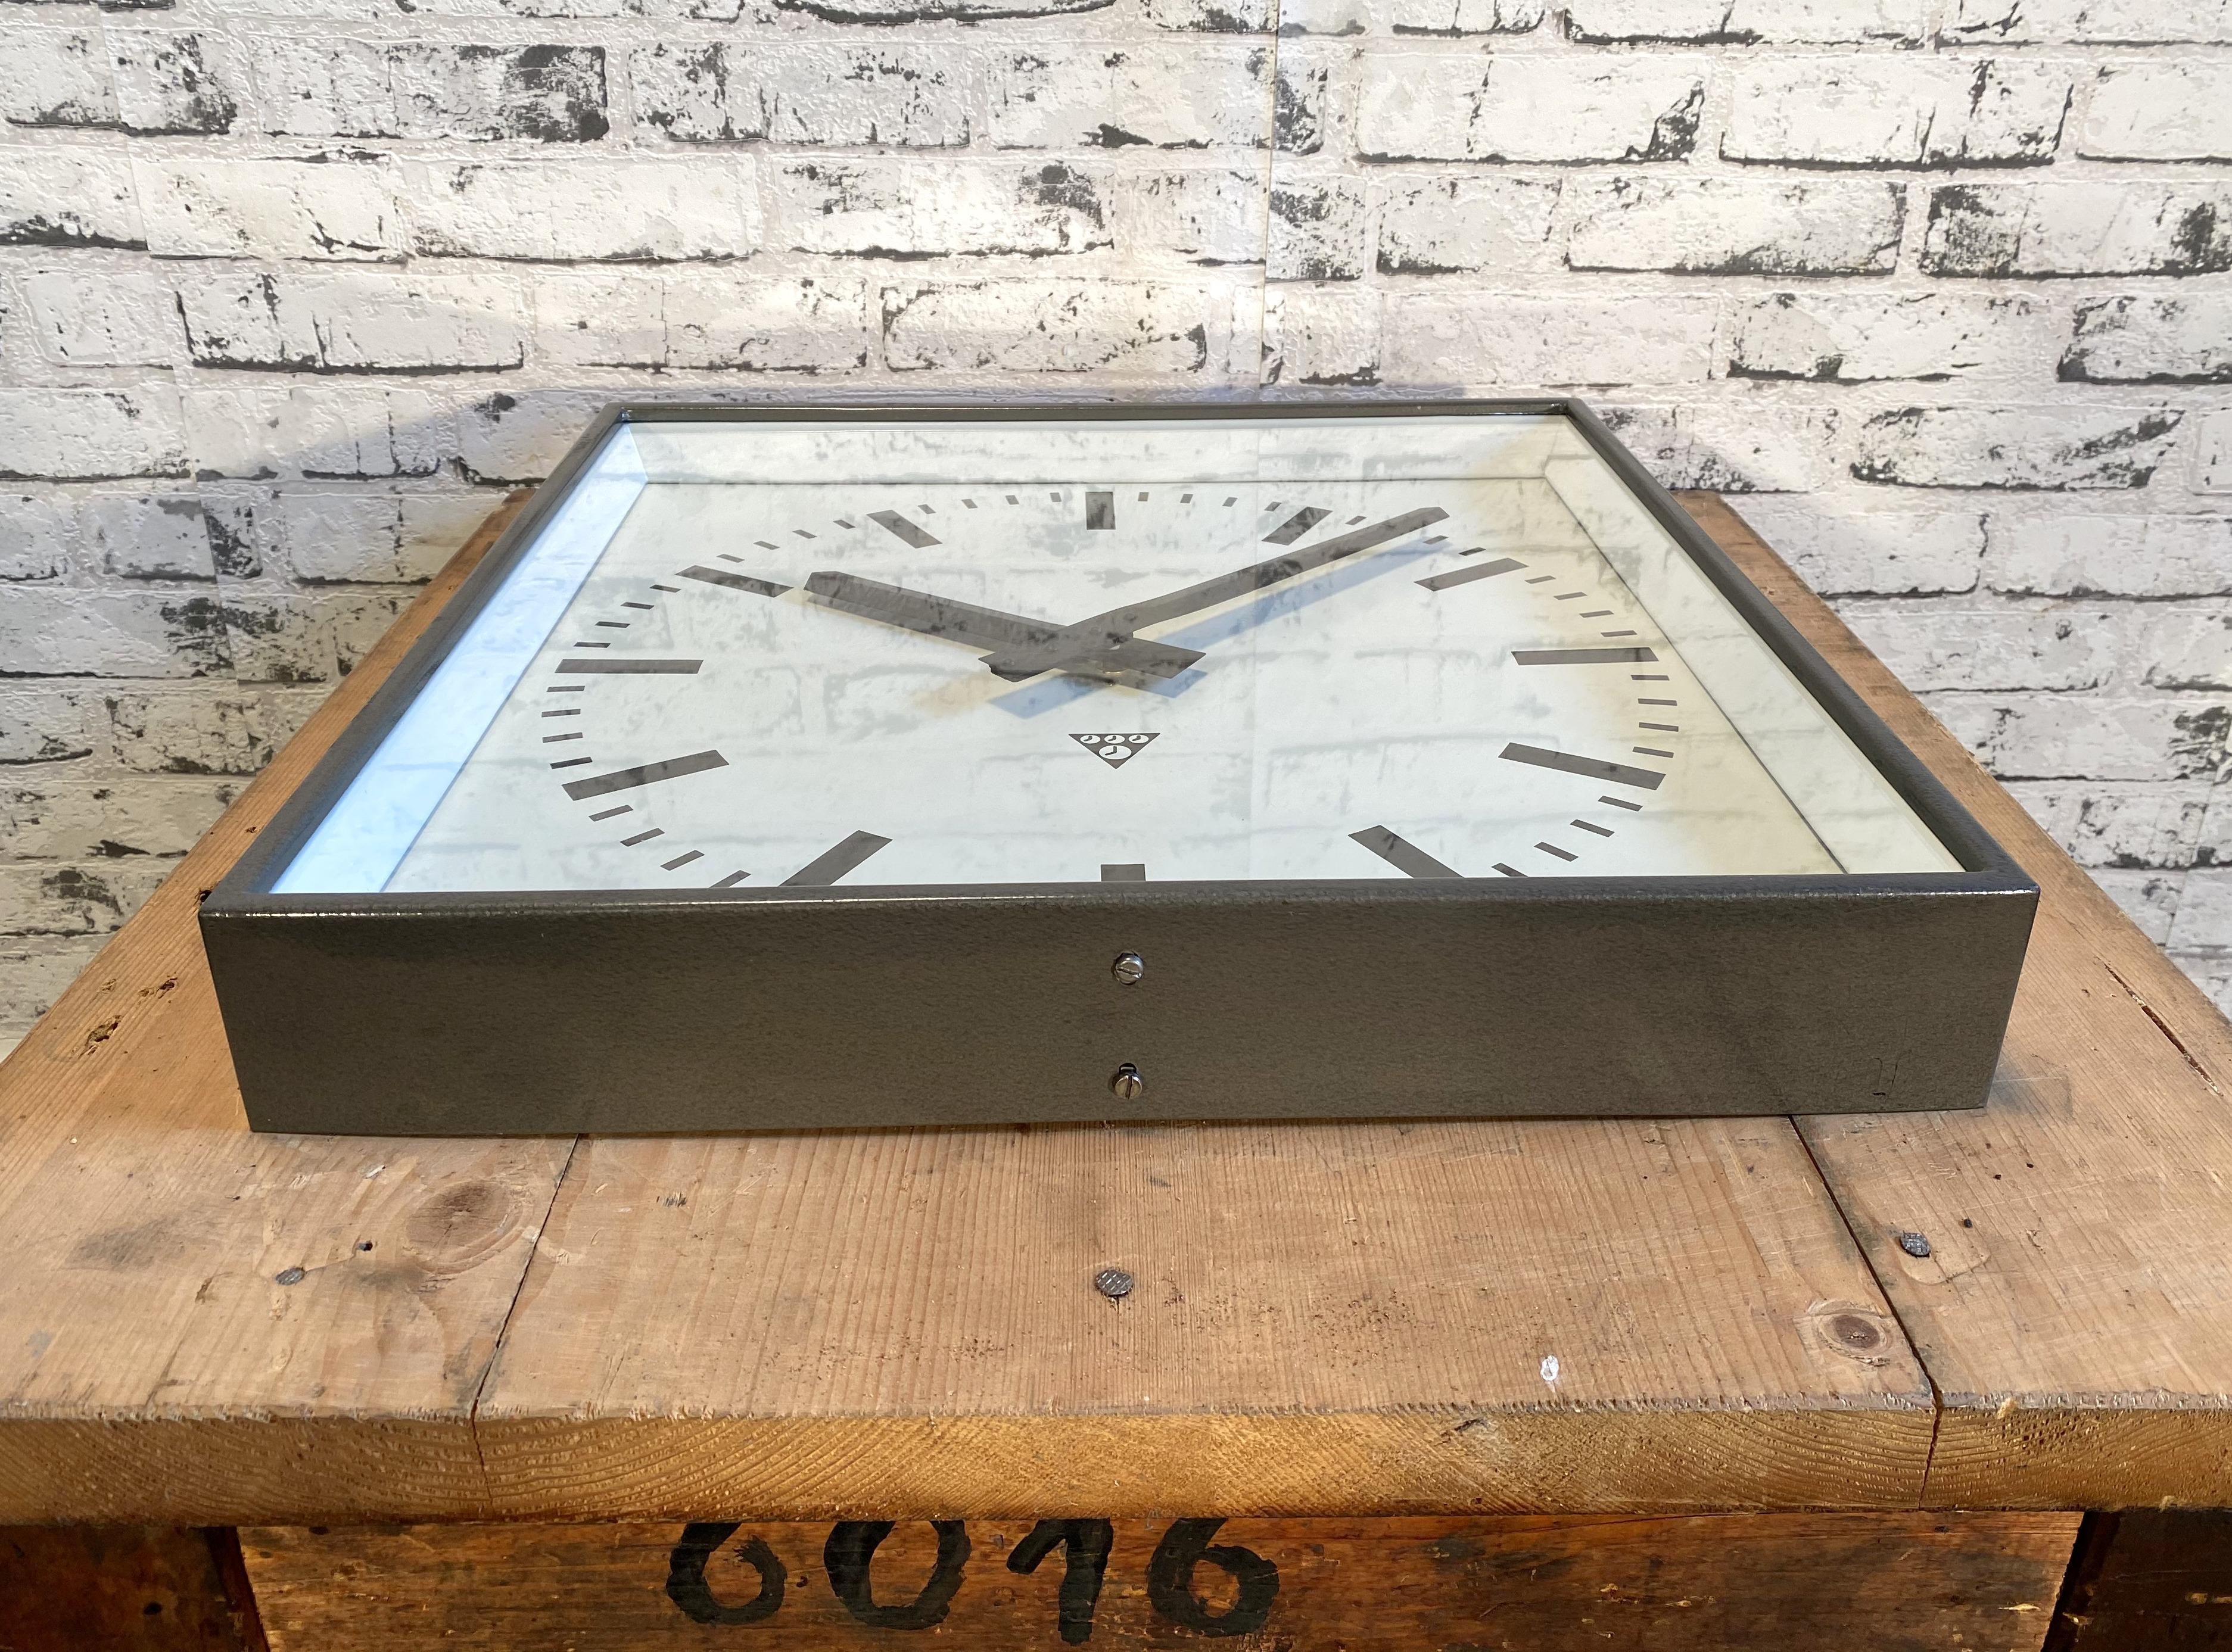 Czech Large Grey Square Wall Clock From Pragotron, 1960s